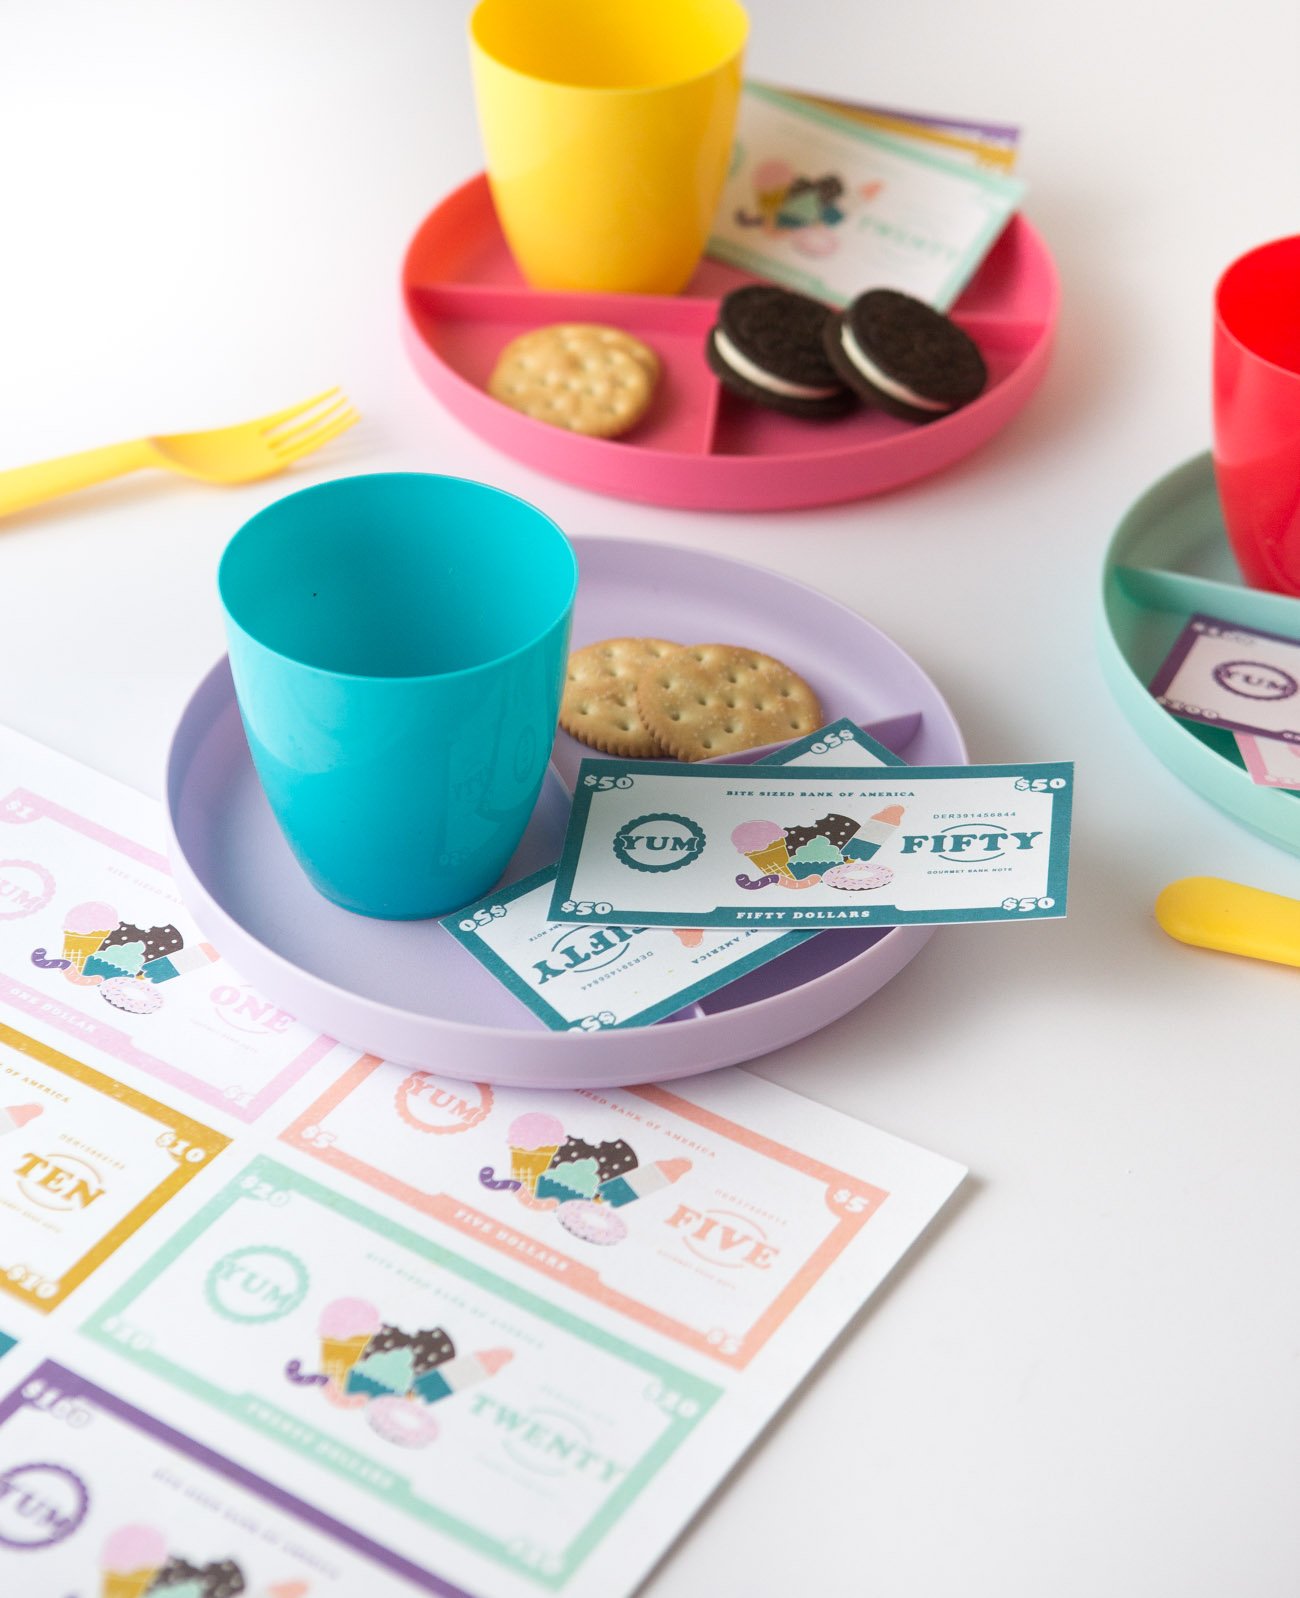 Play restuarant with dessert themed free printable play money for kids, $1, $5, $10, $20, $50, $100